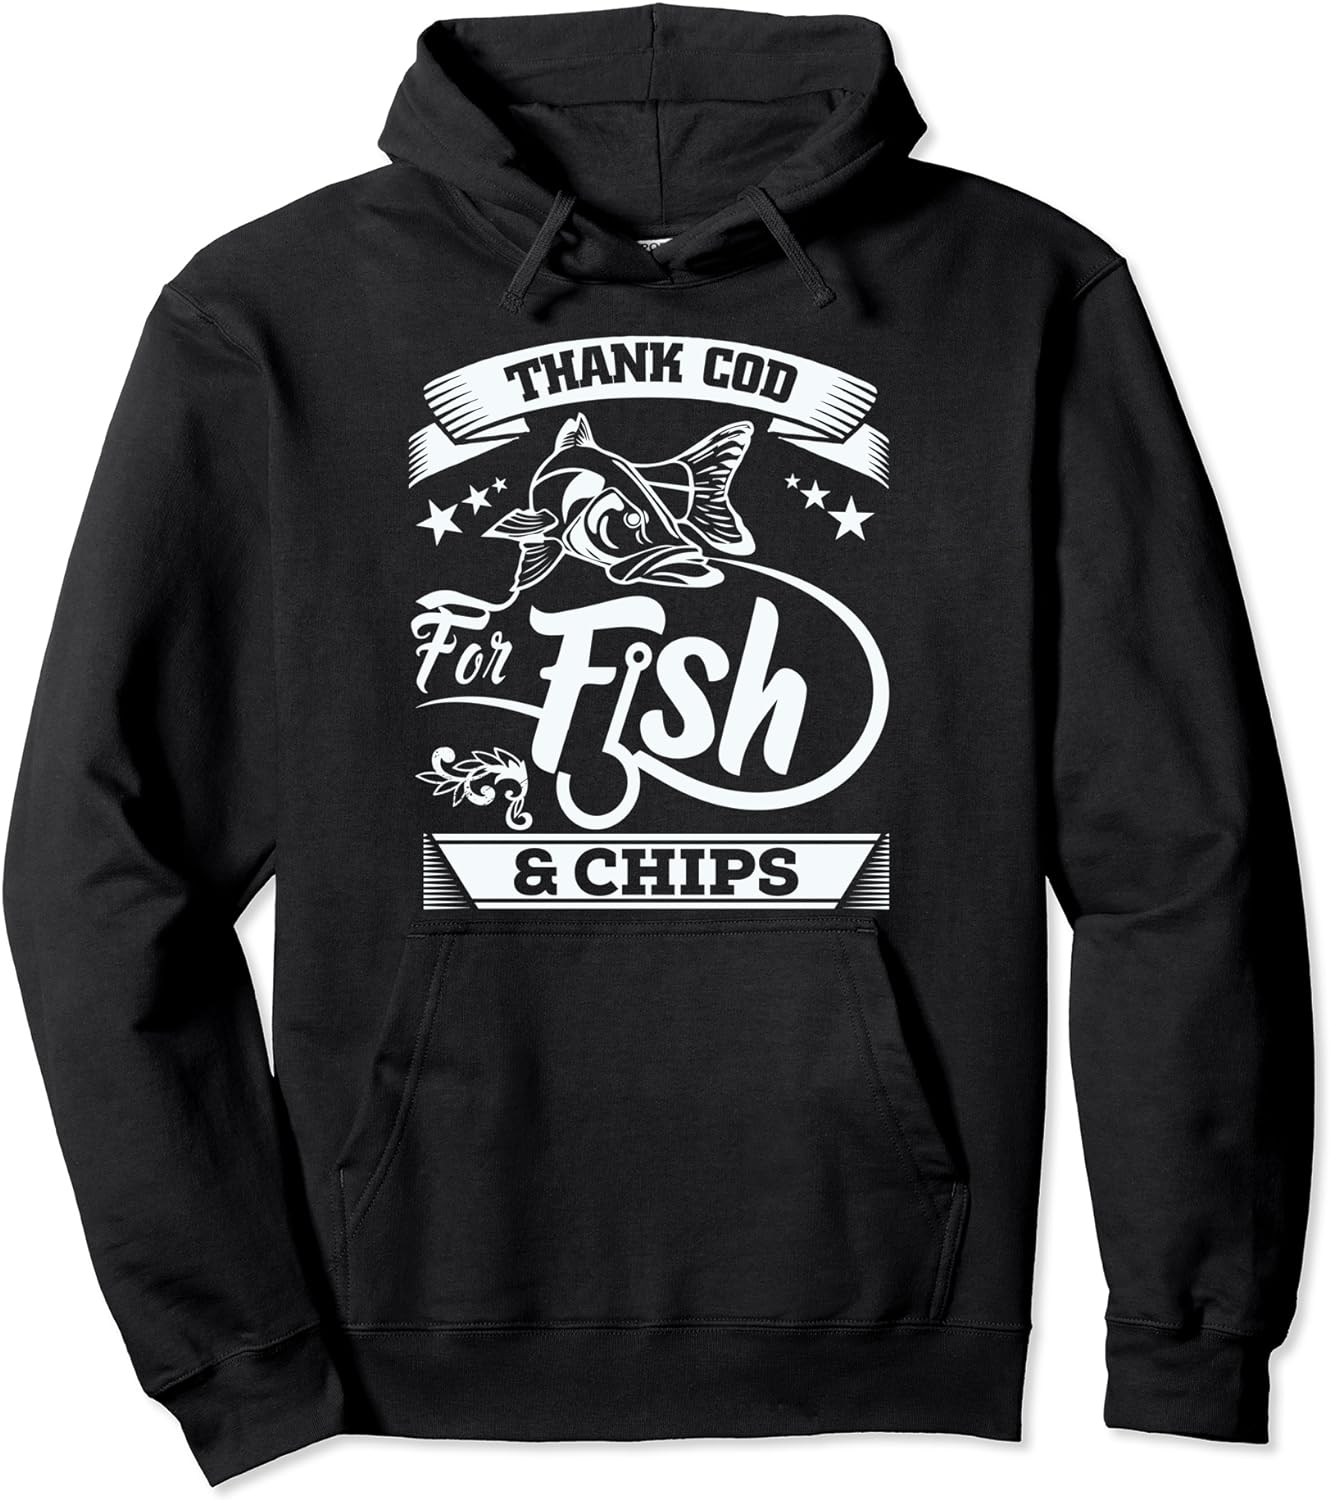 Thank Cod for Fish & Chips Hoodie